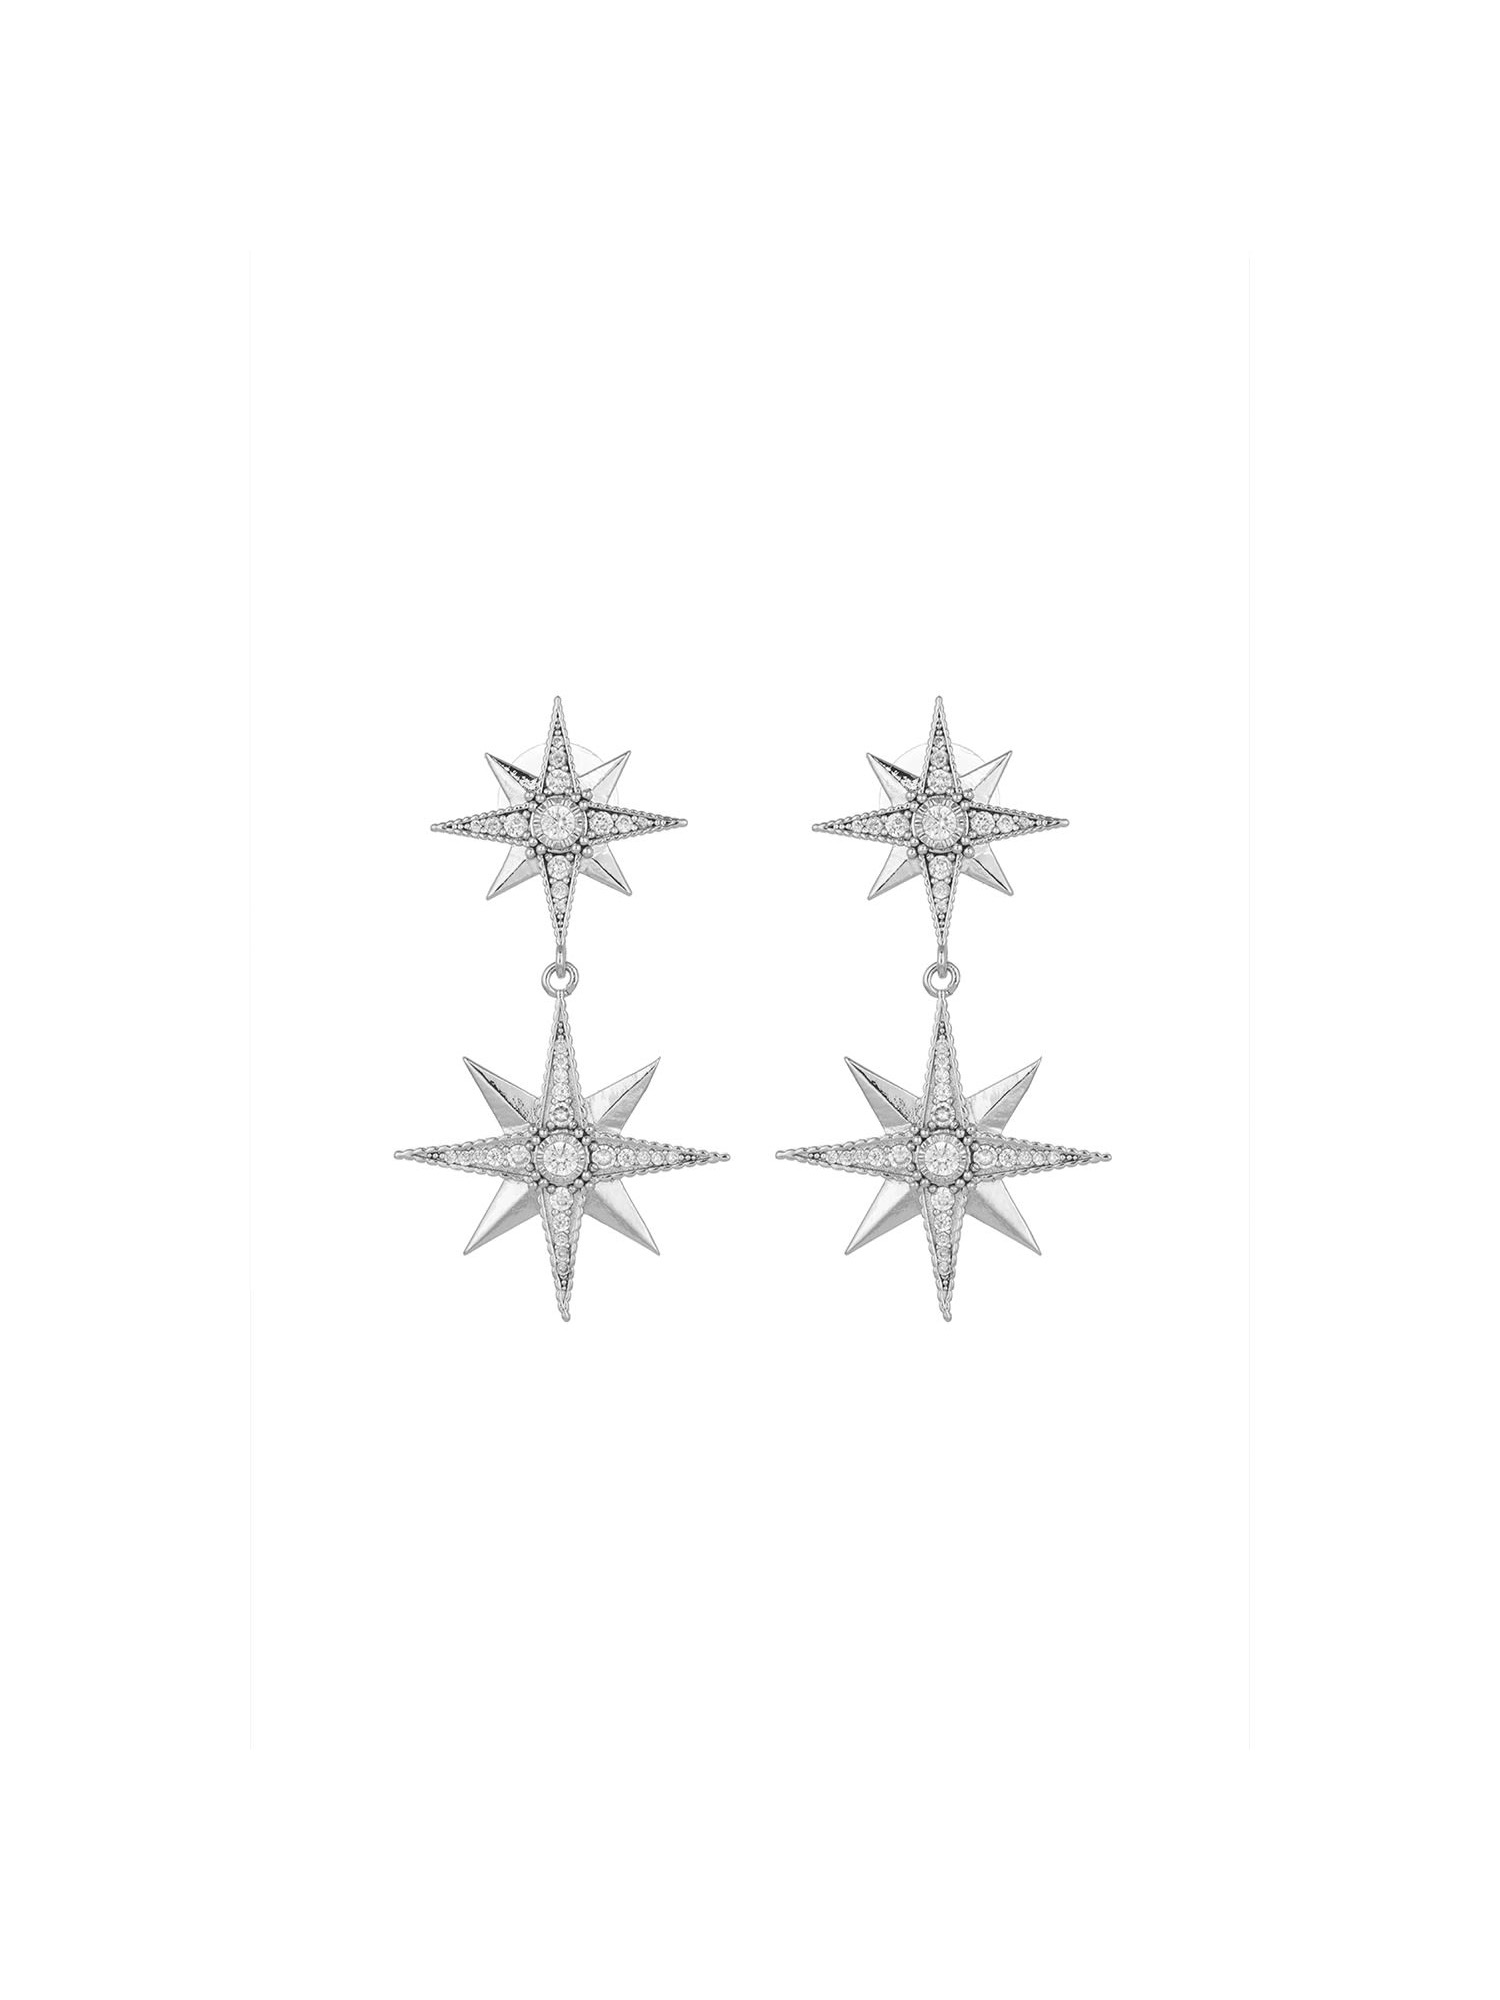 THE NORTH STAR EARRINGS RODIUM